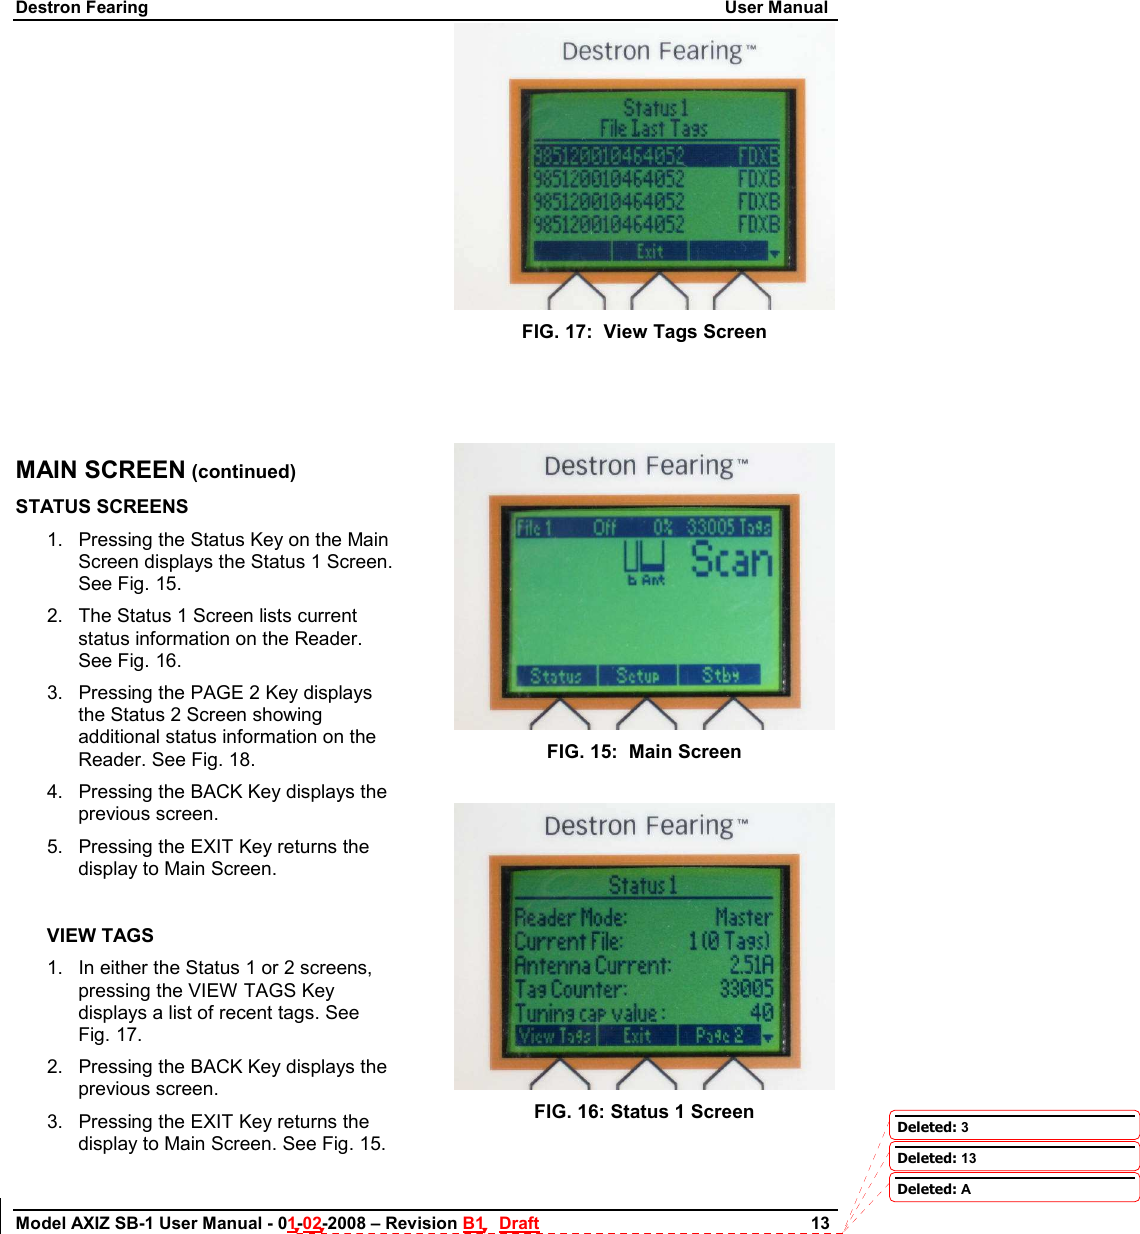 Destron Fearing                                                                                                                        User Manual Model AXIZ SB-1 User Manual - 01-02-2008 – Revision B1   Draft                        13             MAIN SCREEN (continued) STATUS SCREENS 1.  Pressing the Status Key on the Main Screen displays the Status 1 Screen. See Fig. 15. 2.  The Status 1 Screen lists current status information on the Reader. See Fig. 16.      3.  Pressing the PAGE 2 Key displays the Status 2 Screen showing additional status information on the Reader. See Fig. 18. 4.  Pressing the BACK Key displays the previous screen. 5.  Pressing the EXIT Key returns the display to Main Screen.  VIEW TAGS 1.  In either the Status 1 or 2 screens, pressing the VIEW TAGS Key displays a list of recent tags. See Fig. 17. 2.  Pressing the BACK Key displays the previous screen. 3.  Pressing the EXIT Key returns the display to Main Screen. See Fig. 15.  FIG. 17:  View Tags Screen     FIG. 15:  Main Screen   FIG. 16: Status 1 Screen  Deleted: 3Deleted: 13Deleted: A